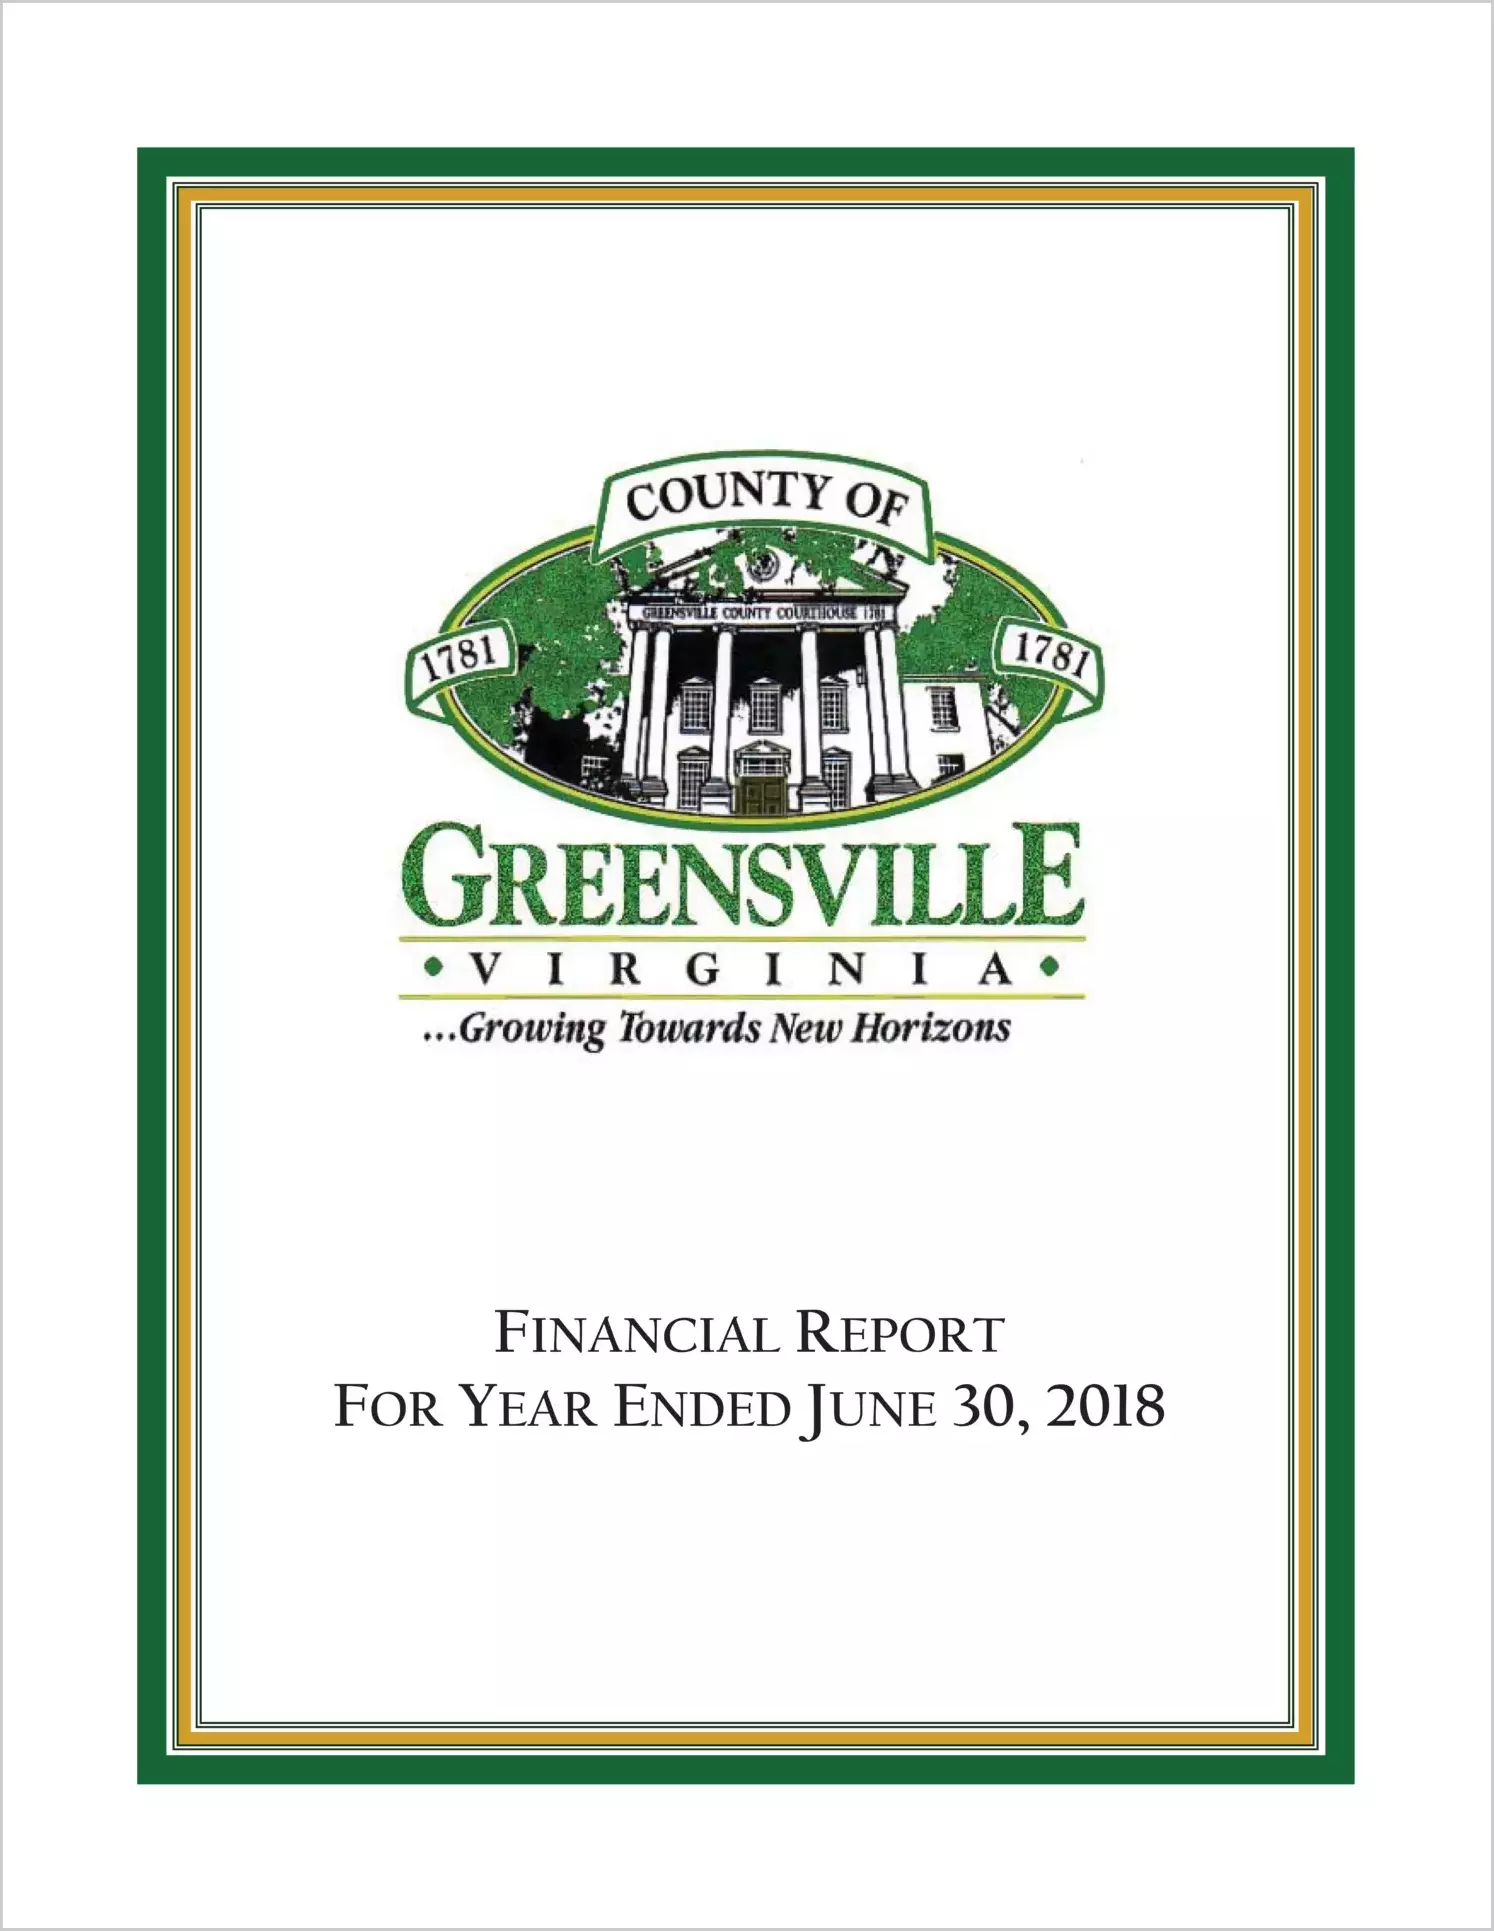 2018 Annual Financial Report for County of Greensville